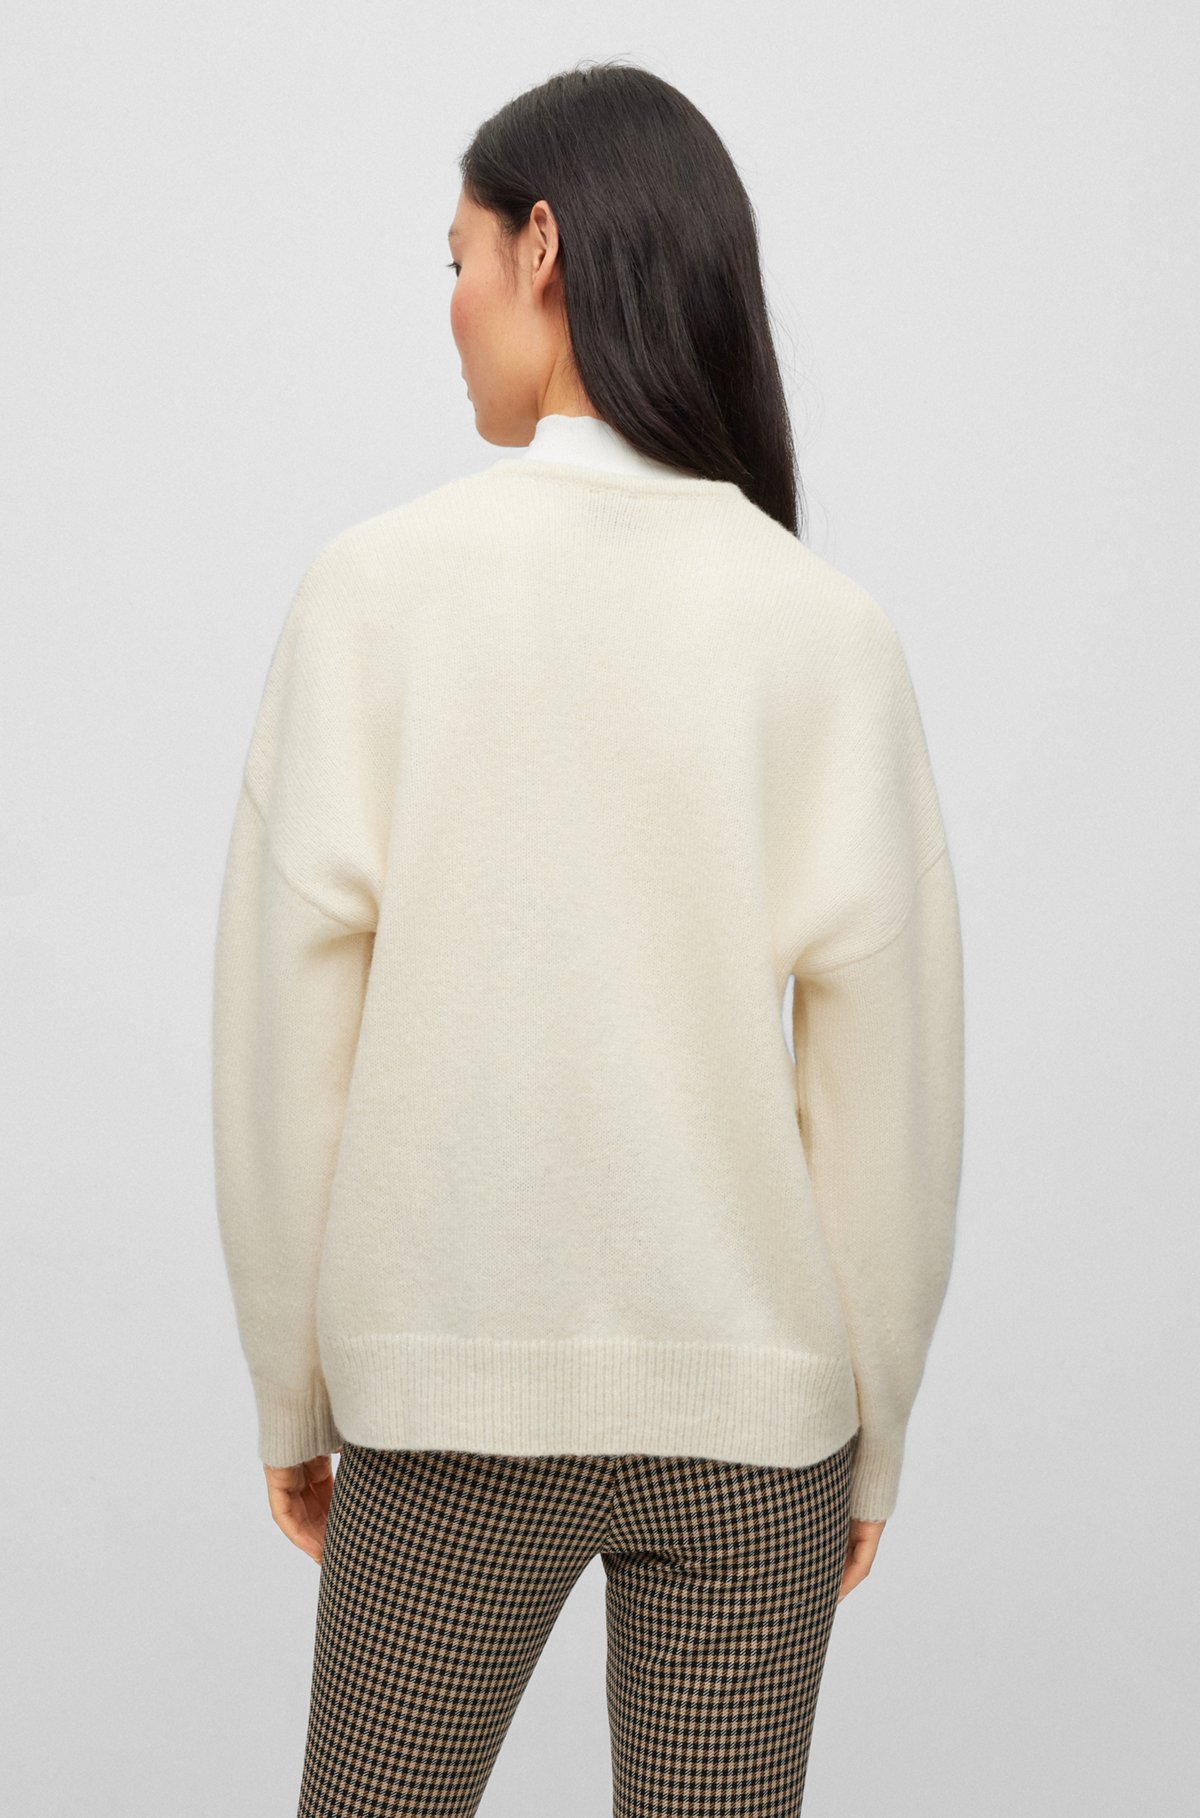 Relaxed-fit V-neck sweater with alpaca and wool, White